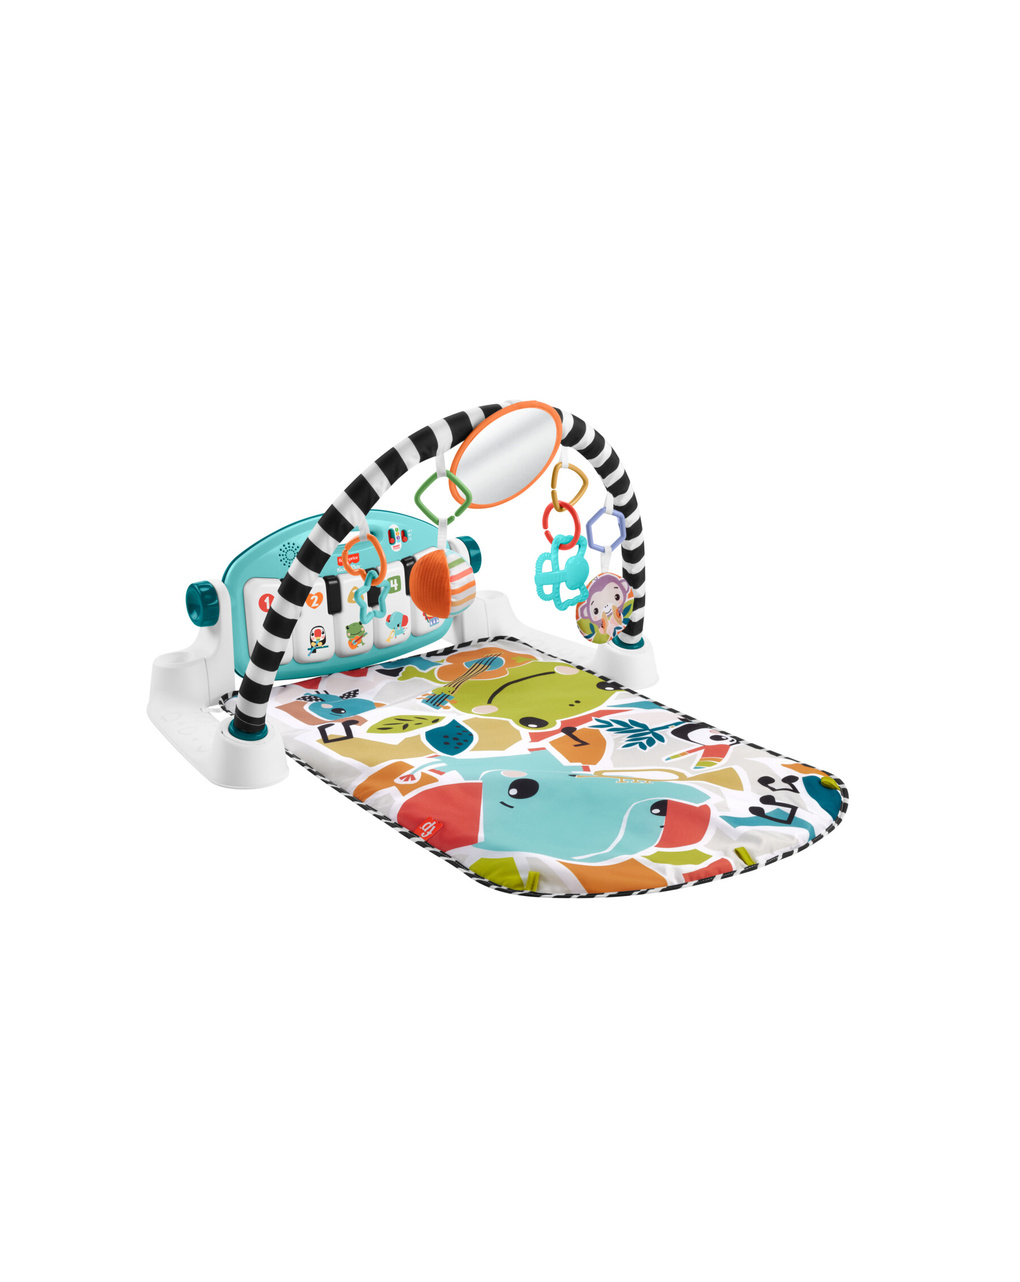 Alfombra de actividades smart stages -0m+ - fisher price - Fisher-Price